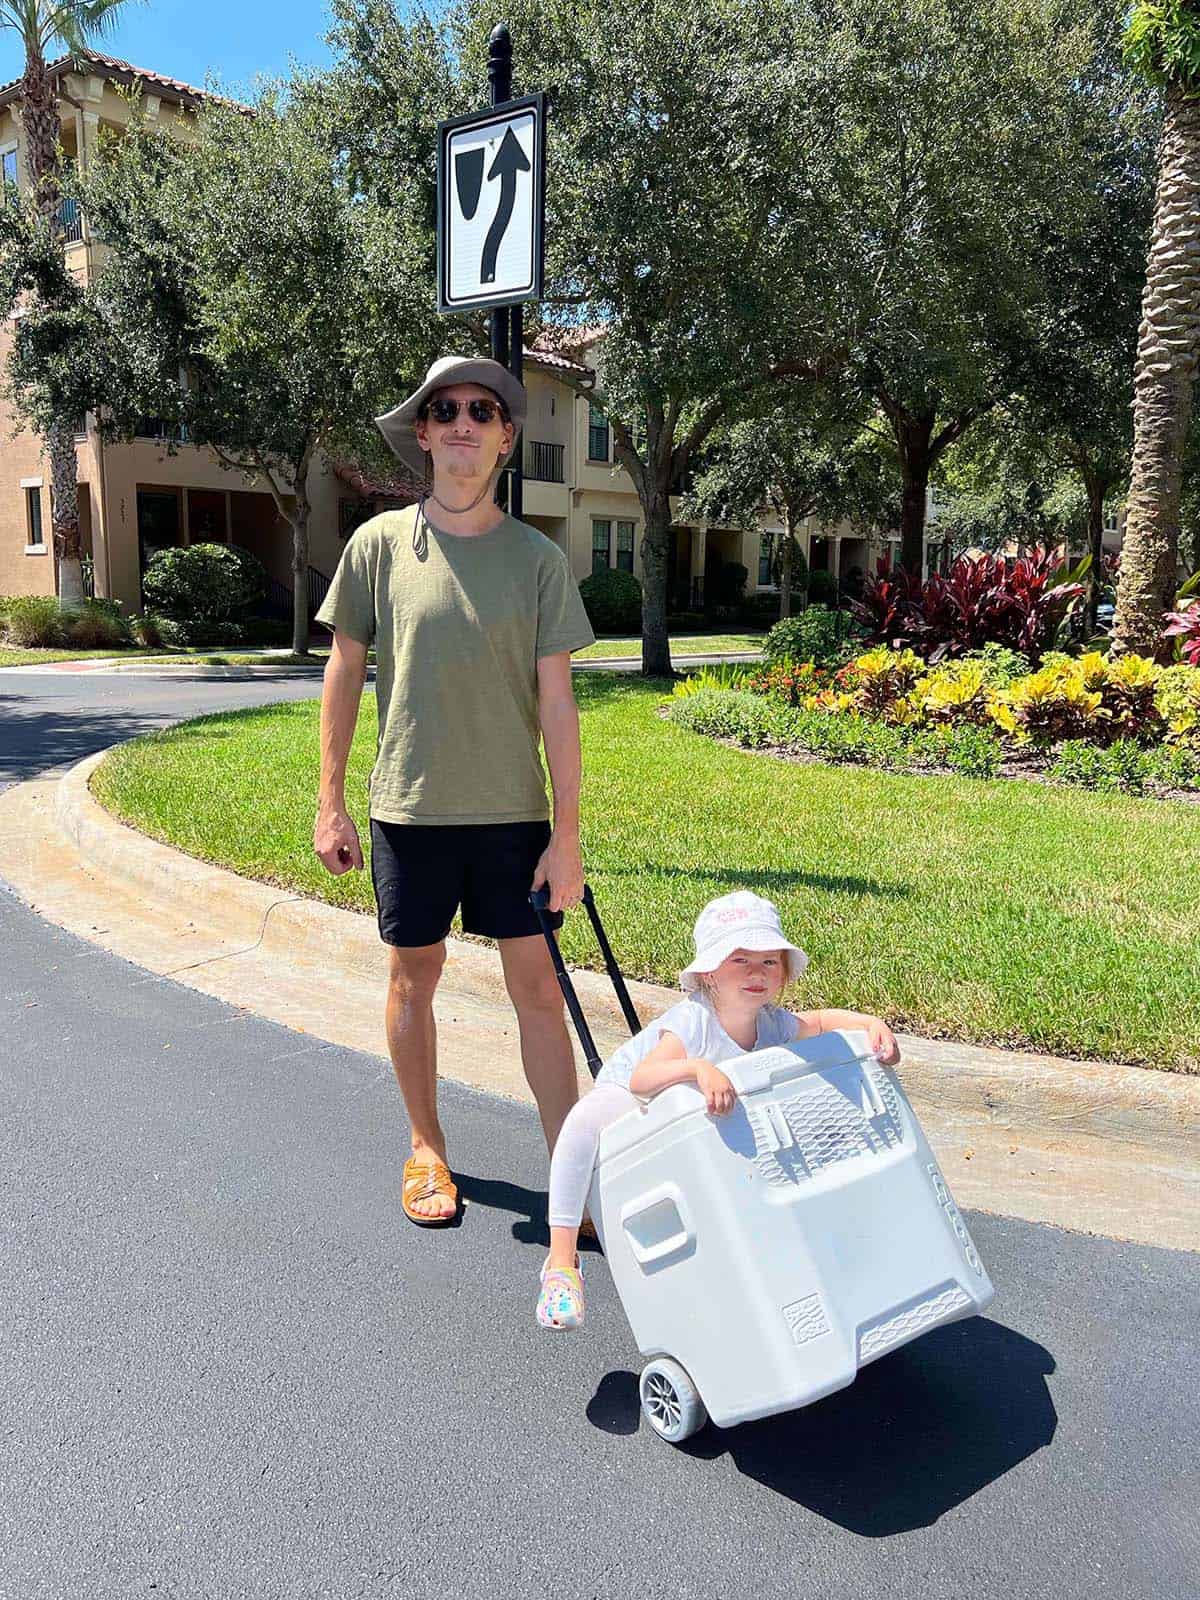 Joaquin with kid in the cooler stroller.